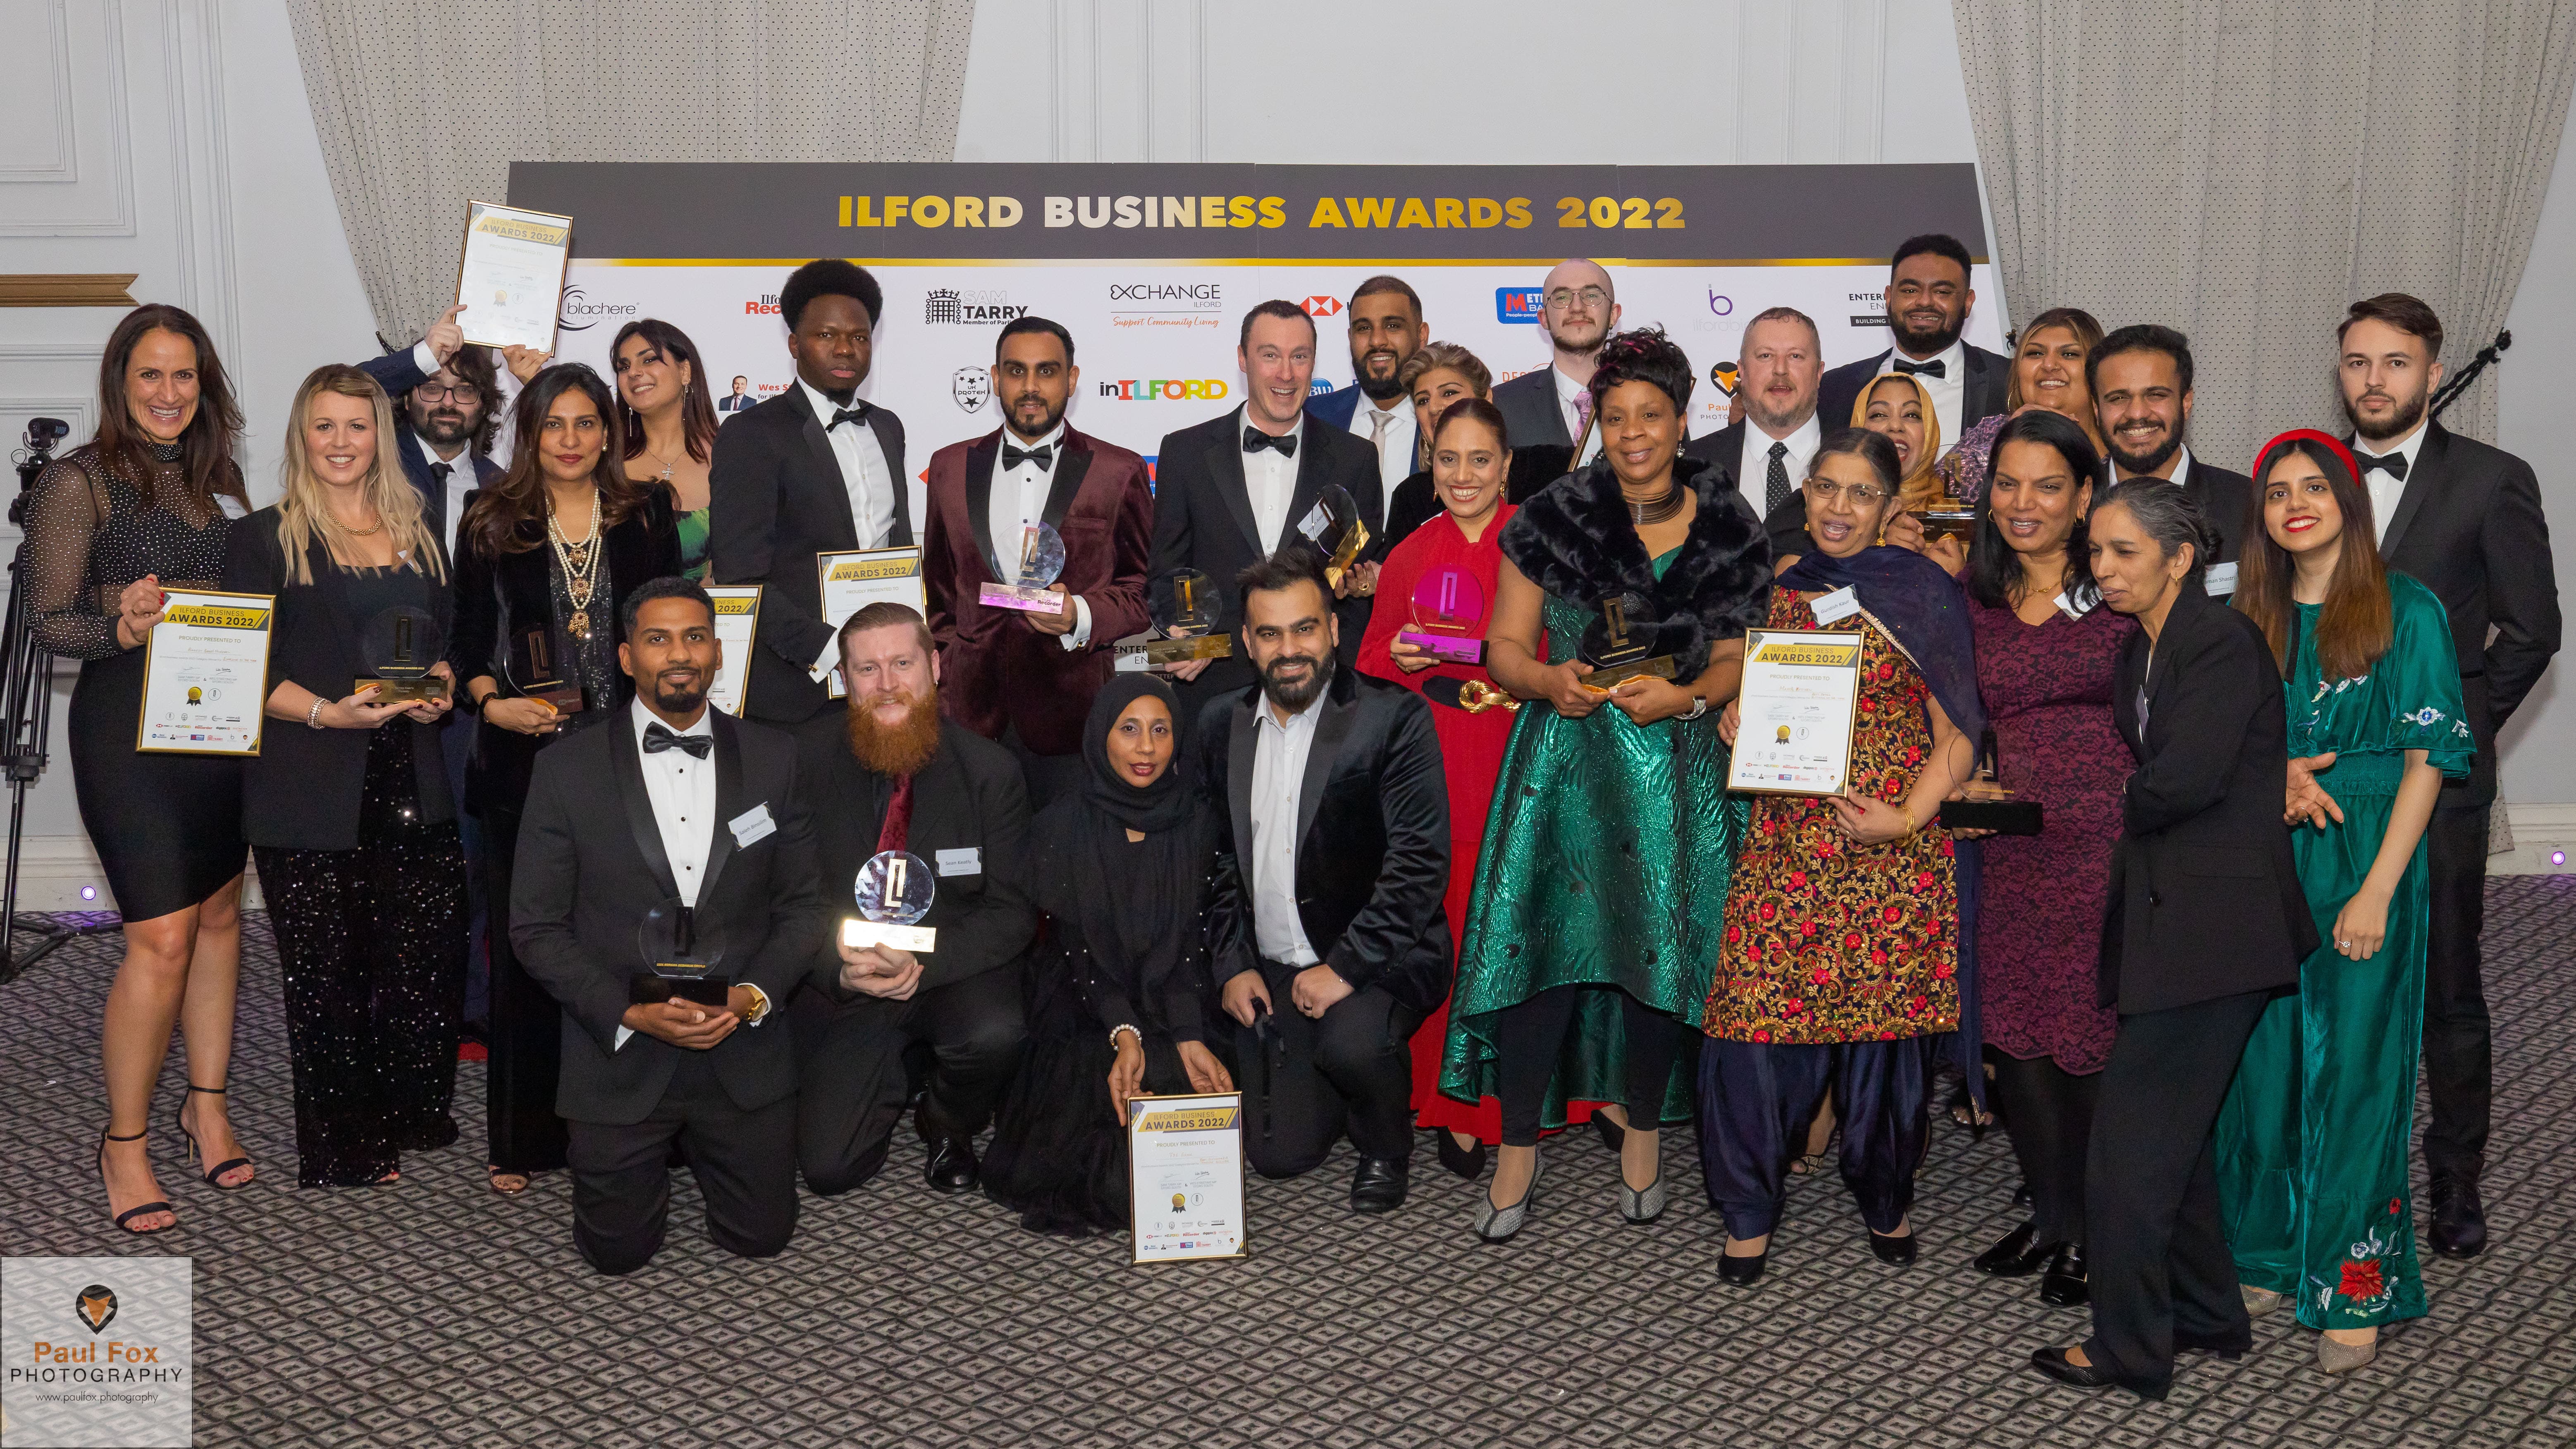 Ilford Business Awards Winners 2022 Group Photo